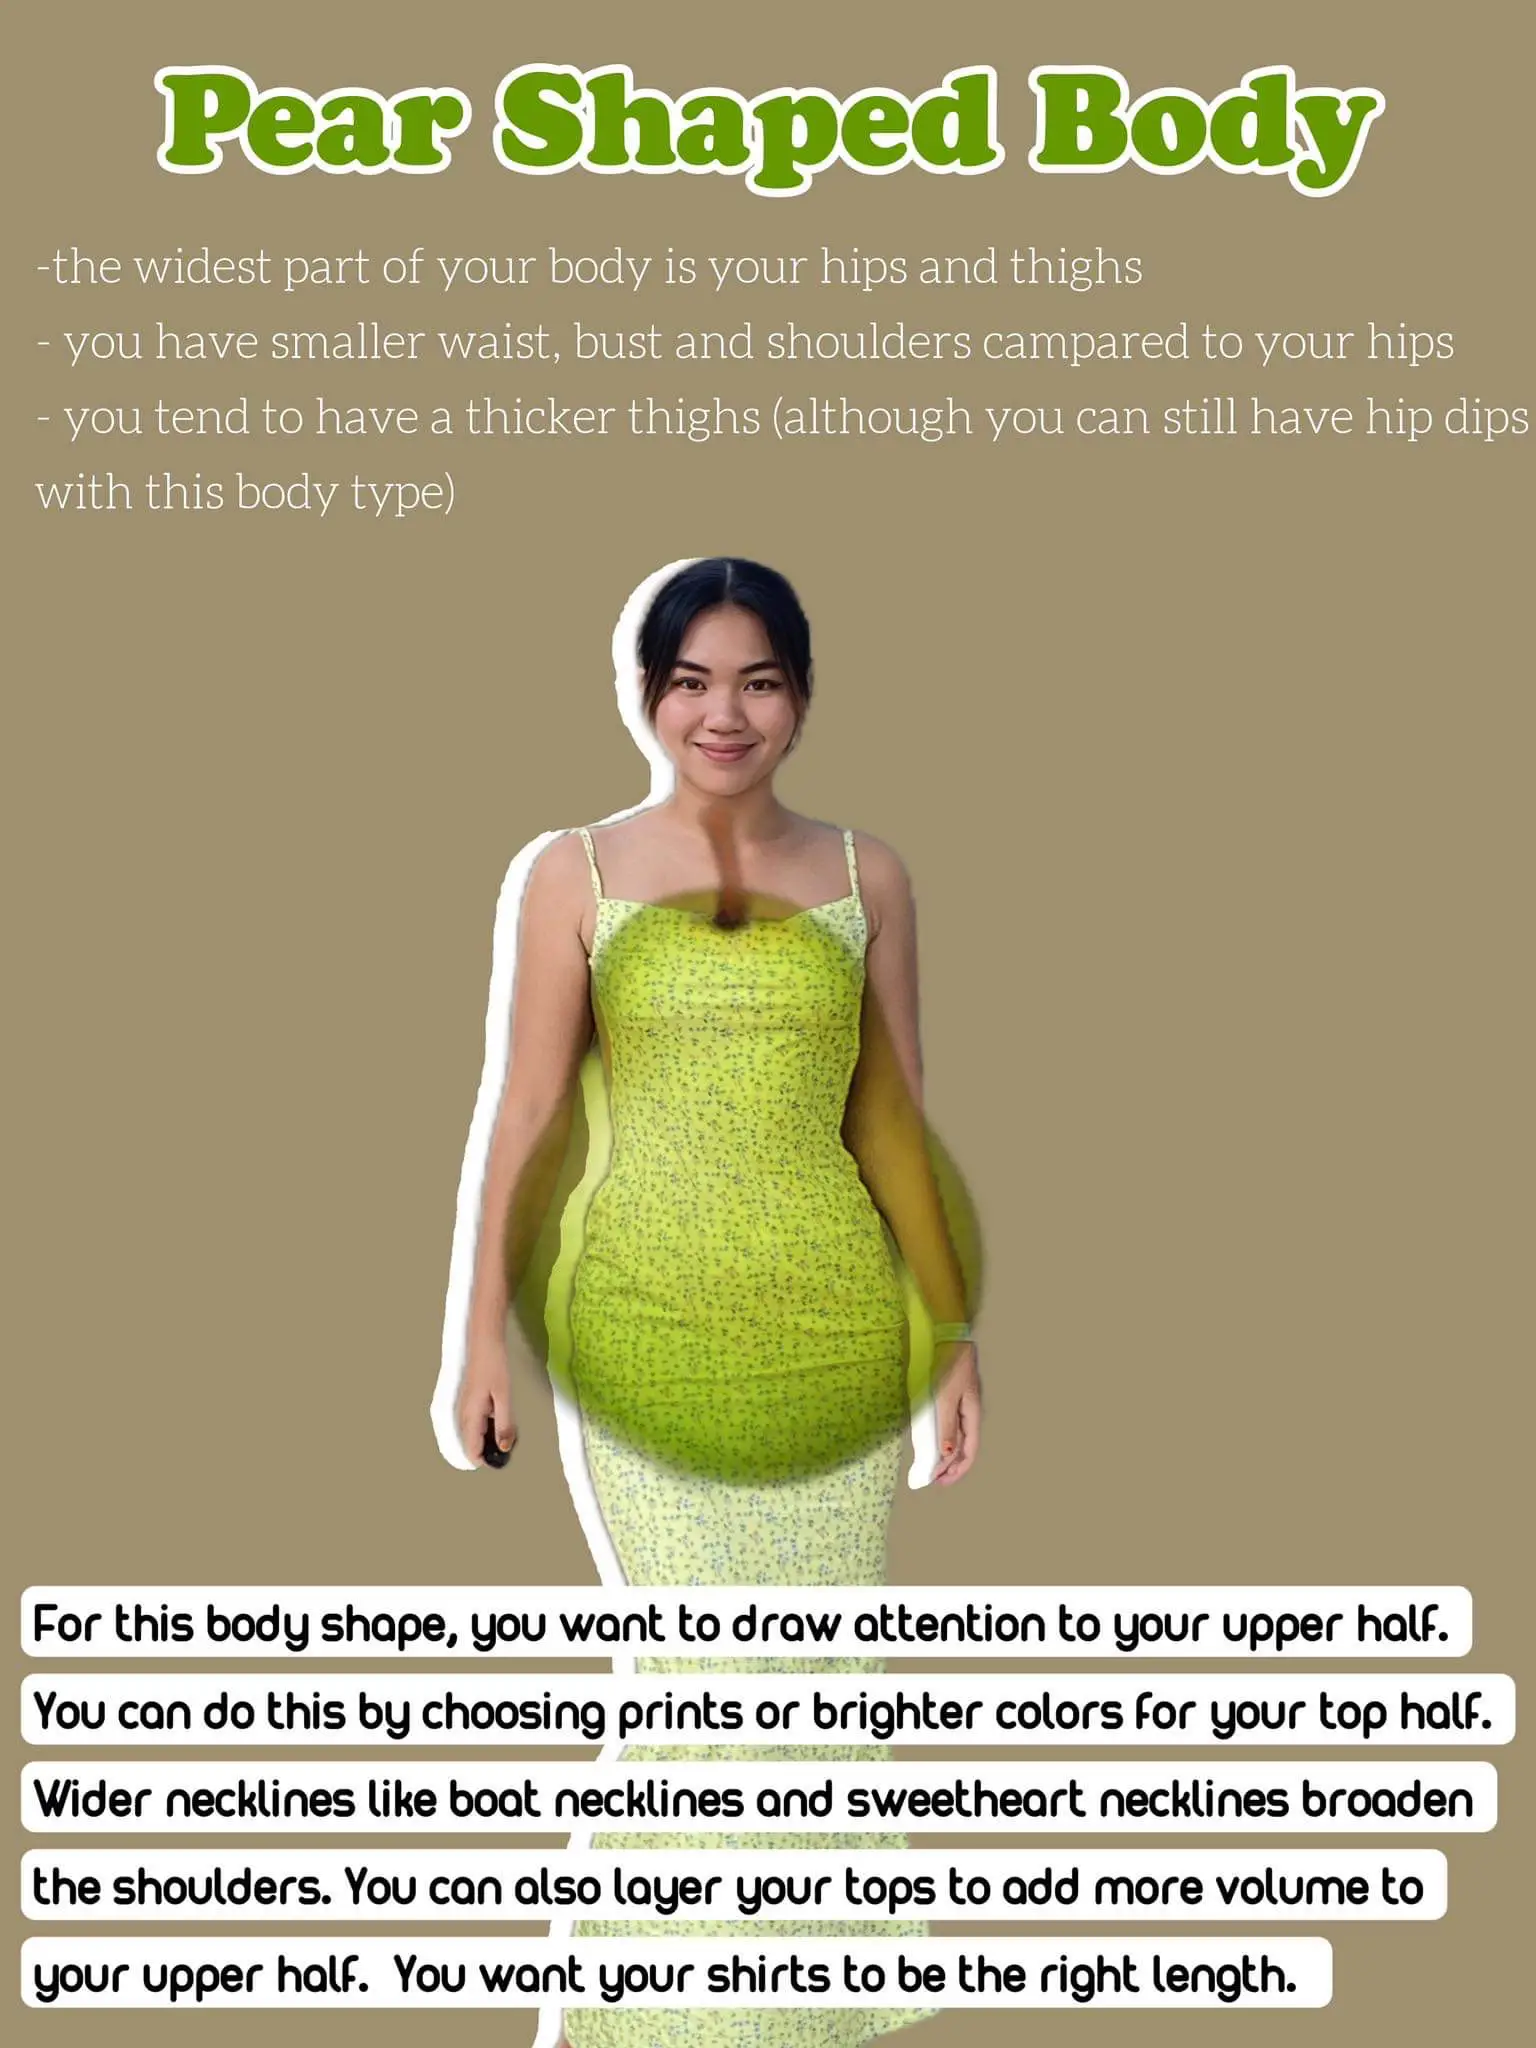 How to Dress the Pear Shaped Body Type - Blufashion